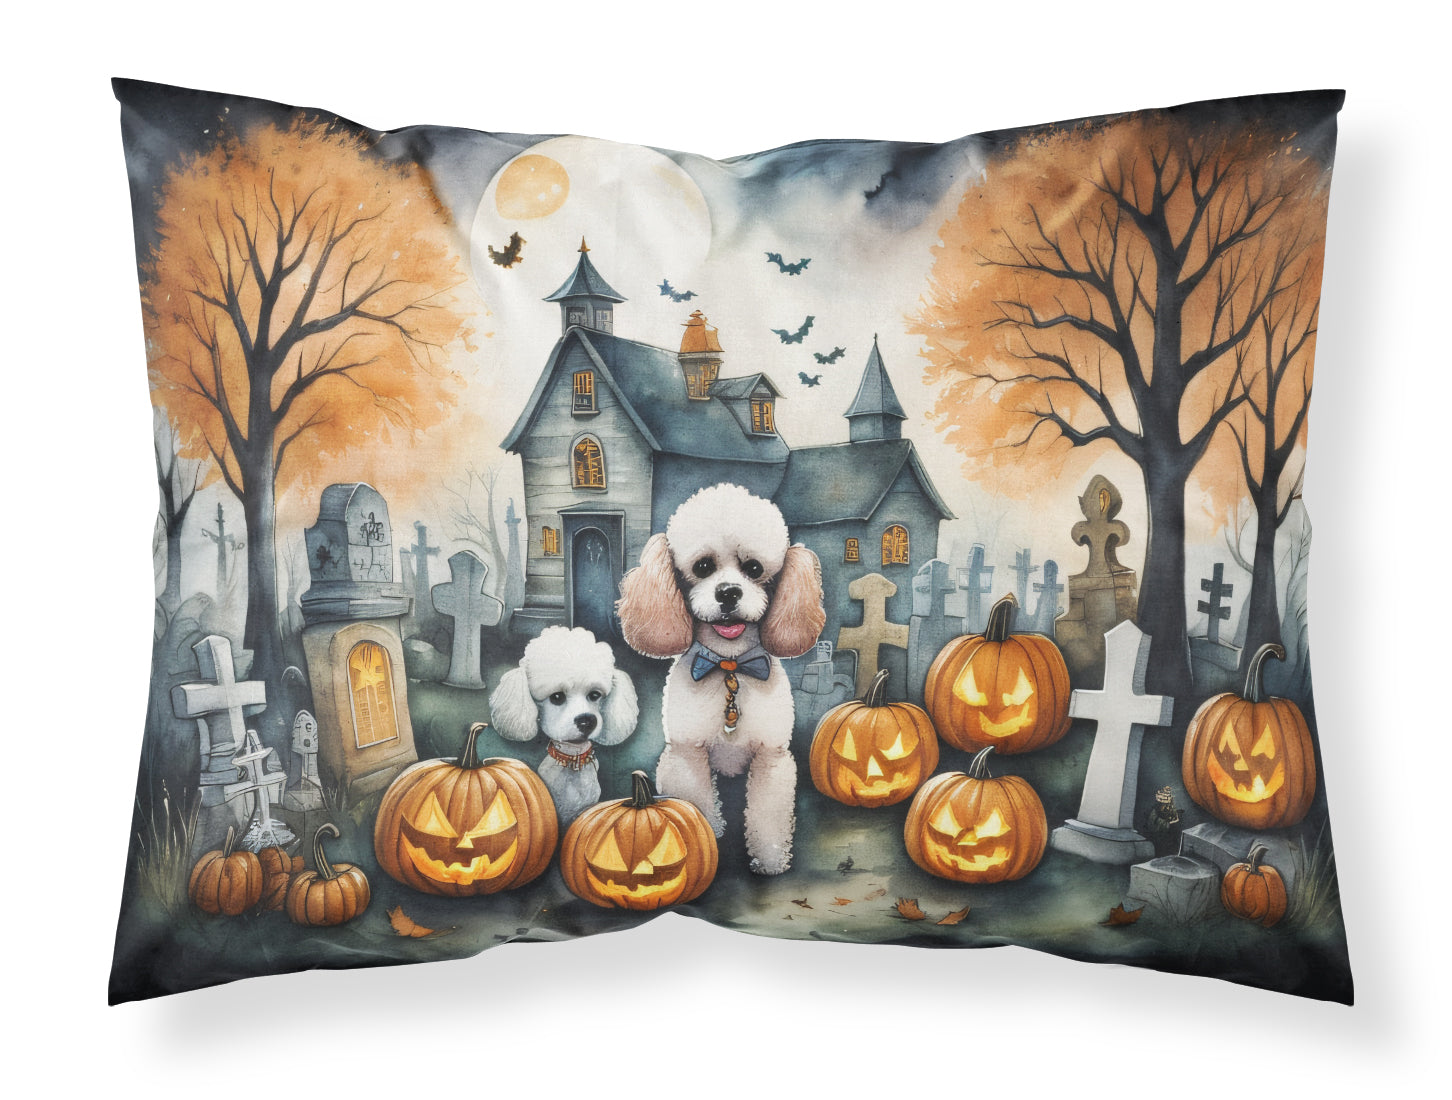 Buy this Poodle Spooky Halloween Fabric Standard Pillowcase